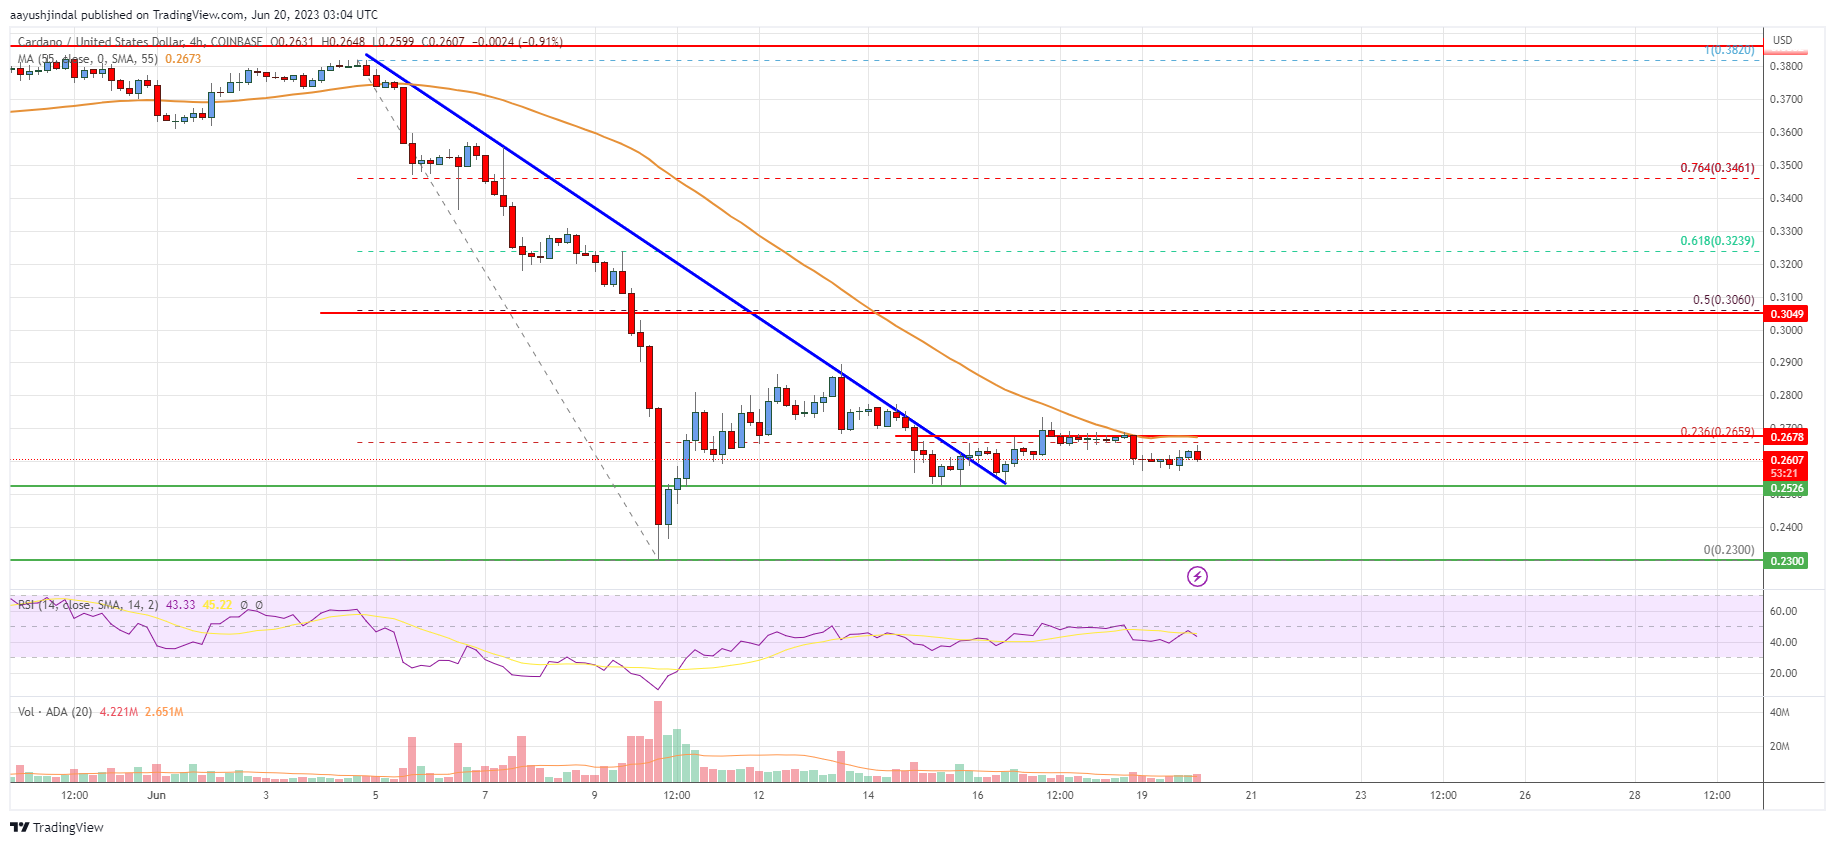 Cardano (ADA) Price Analysis: Recovery Possible Above This Resistance